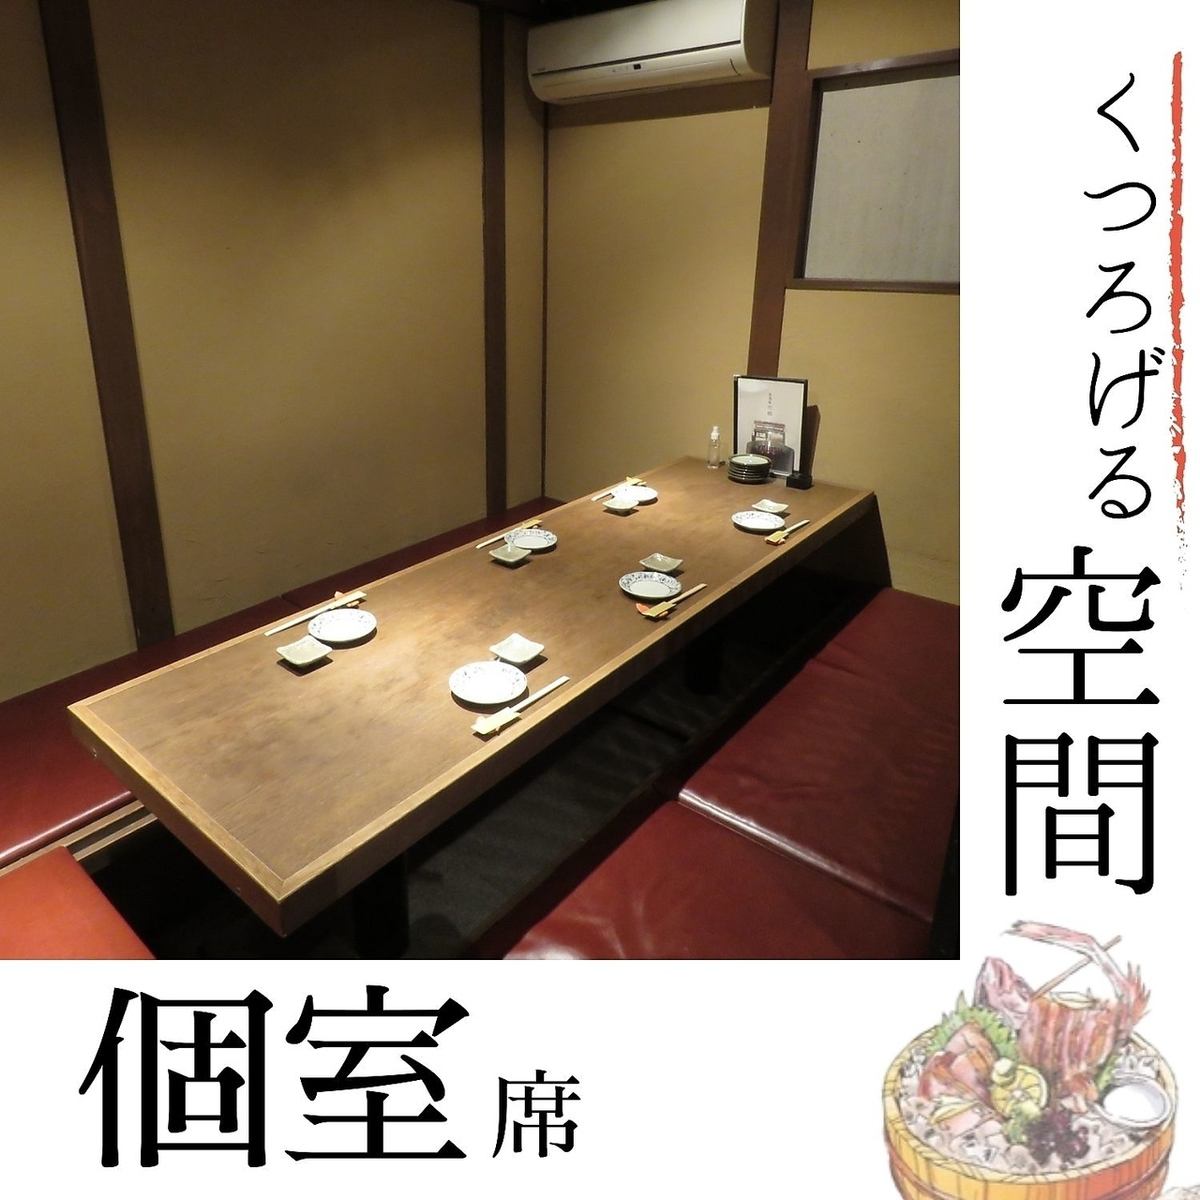 All-you-can-drink courses filled with Hanagumi specialties, perfect for company parties, start from 6,000 yen.